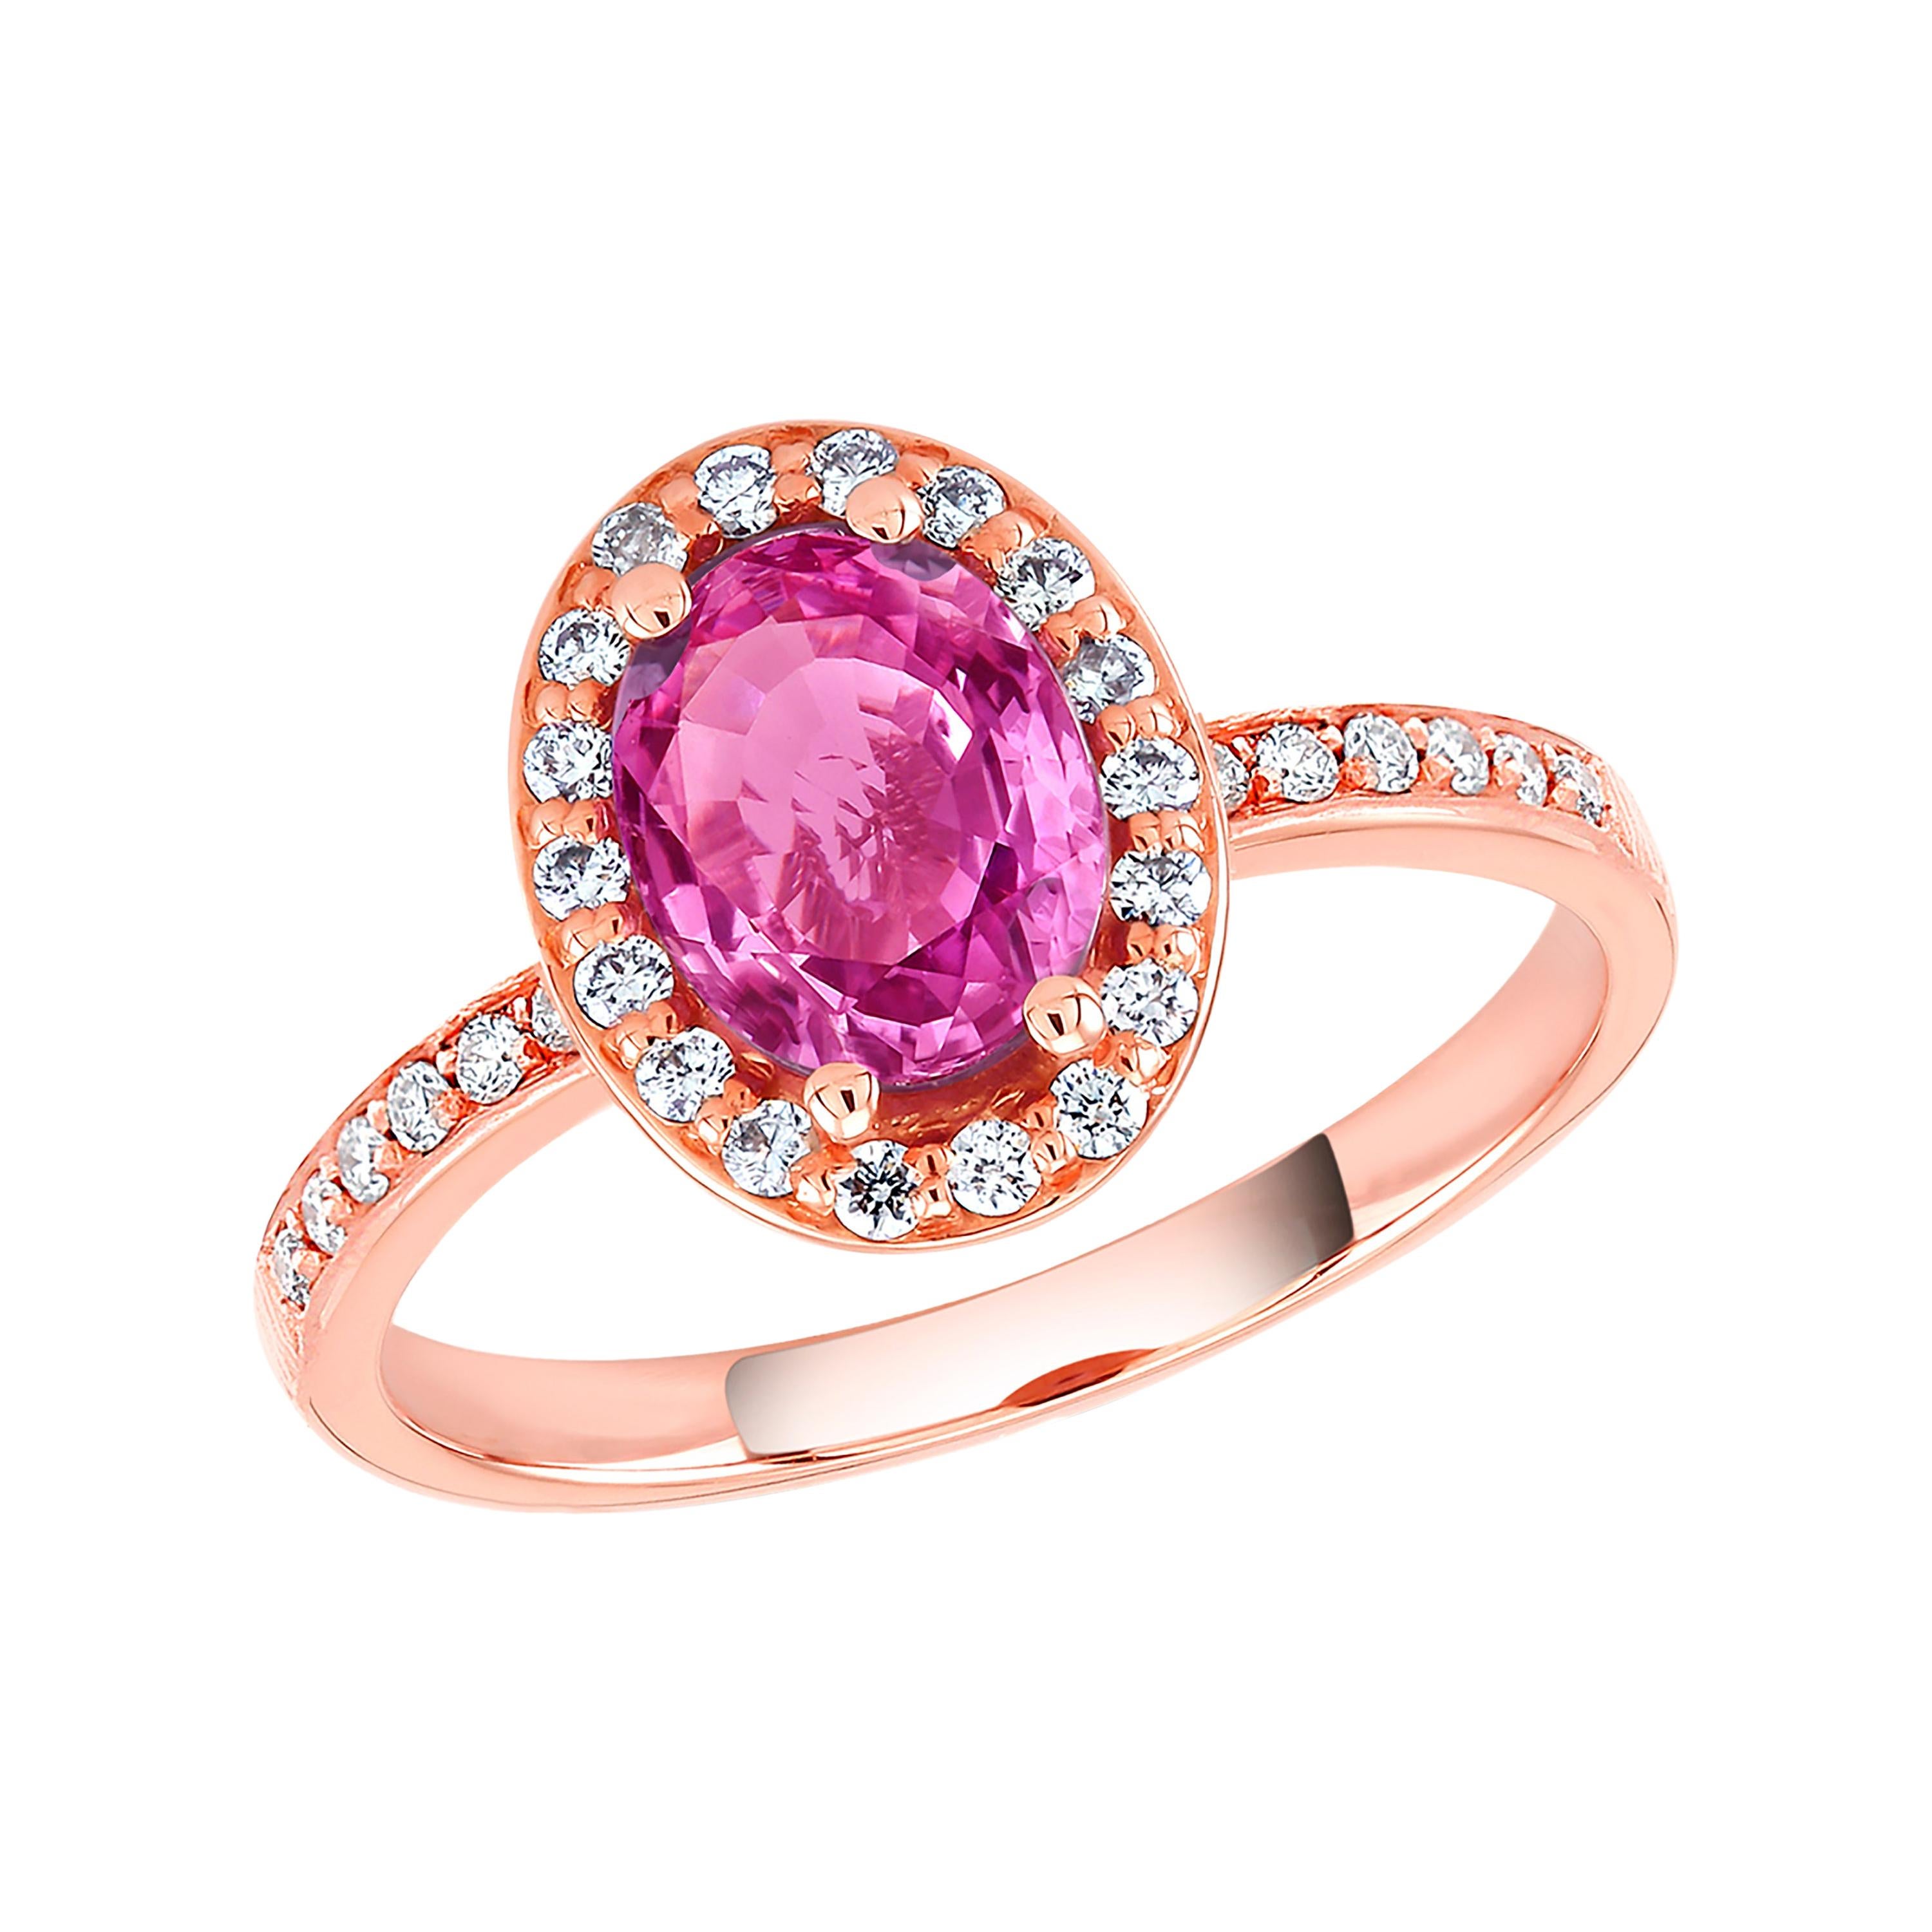 Oval Pink Sapphire and Diamond Rose Gold Cocktail Ring Weighing 1.75 Carat